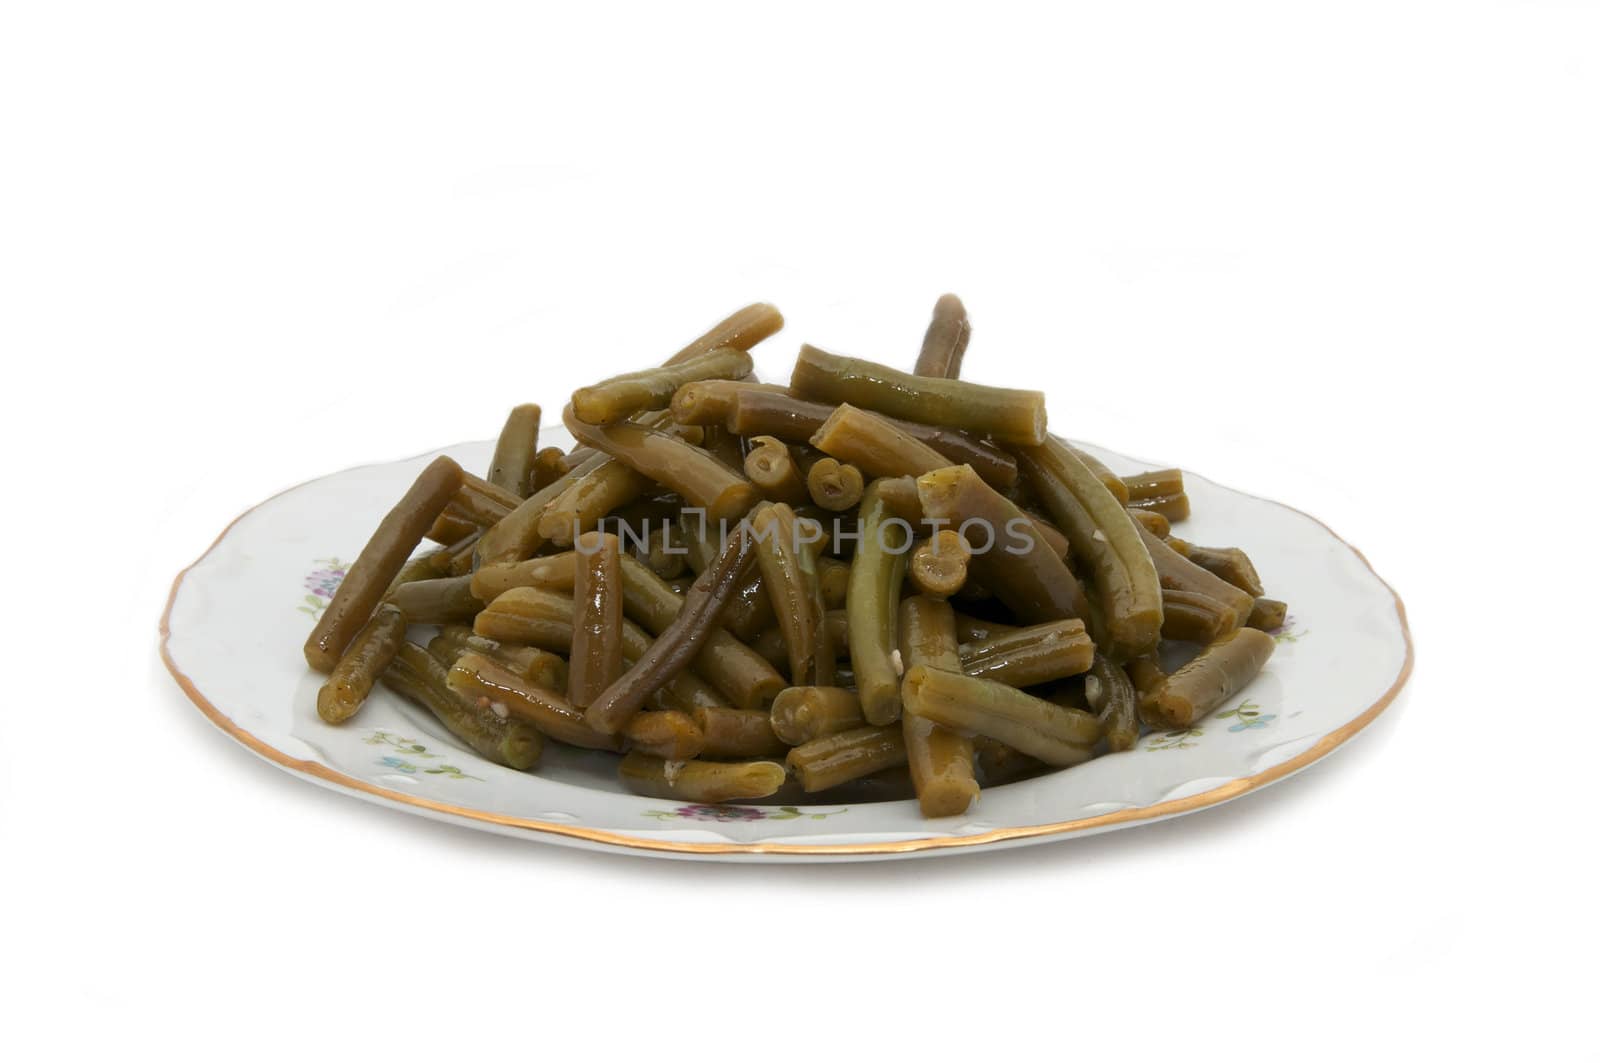 a plate of asparagus by Lester120